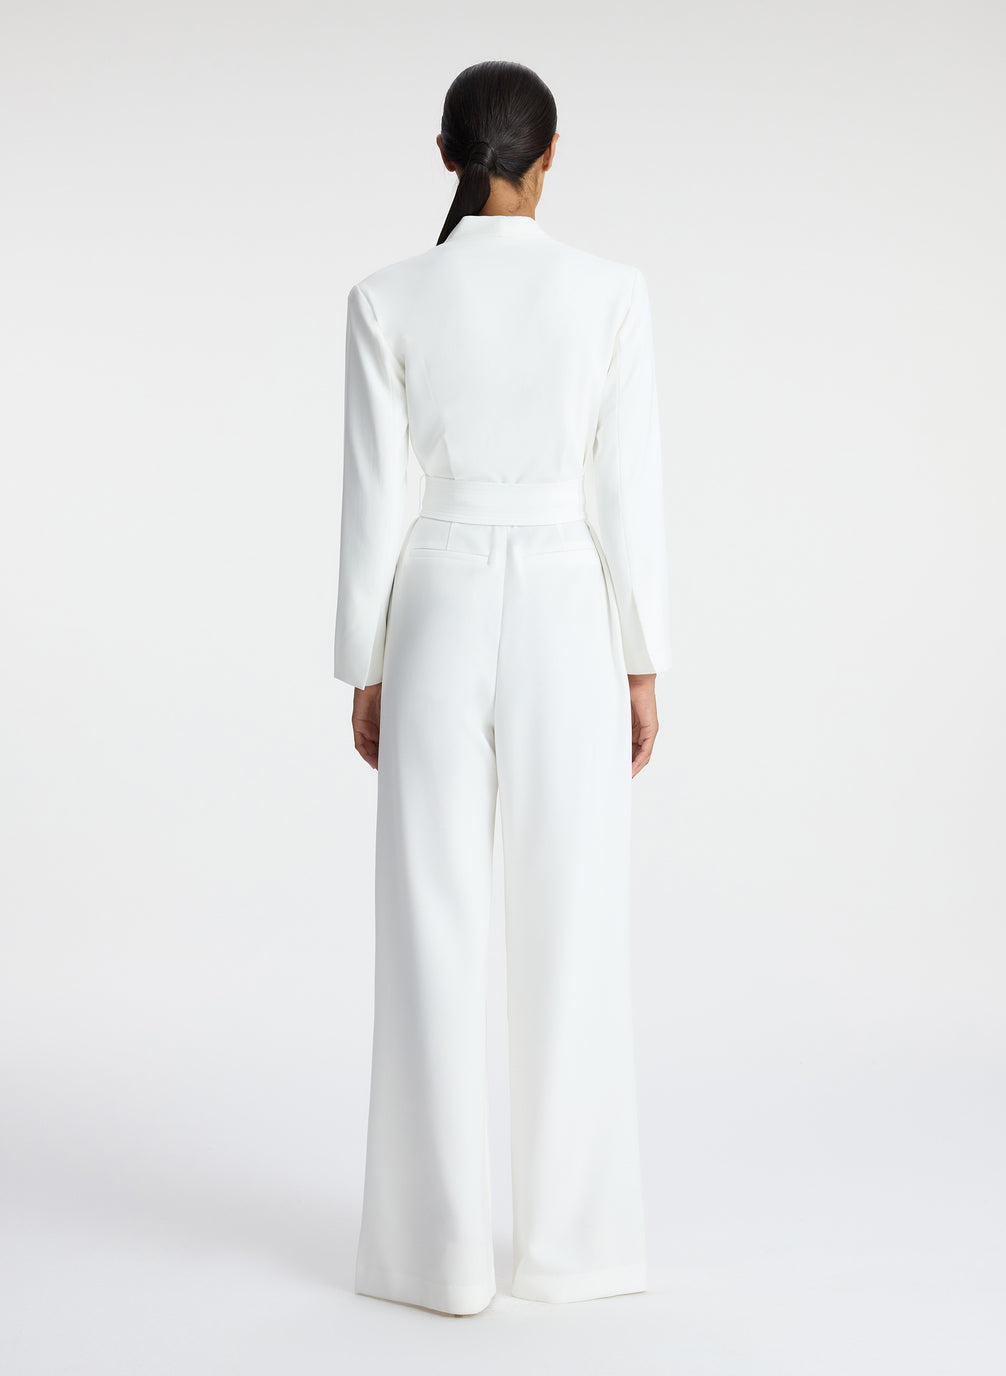 back view of woman wearing white long sleeve jumpsuit